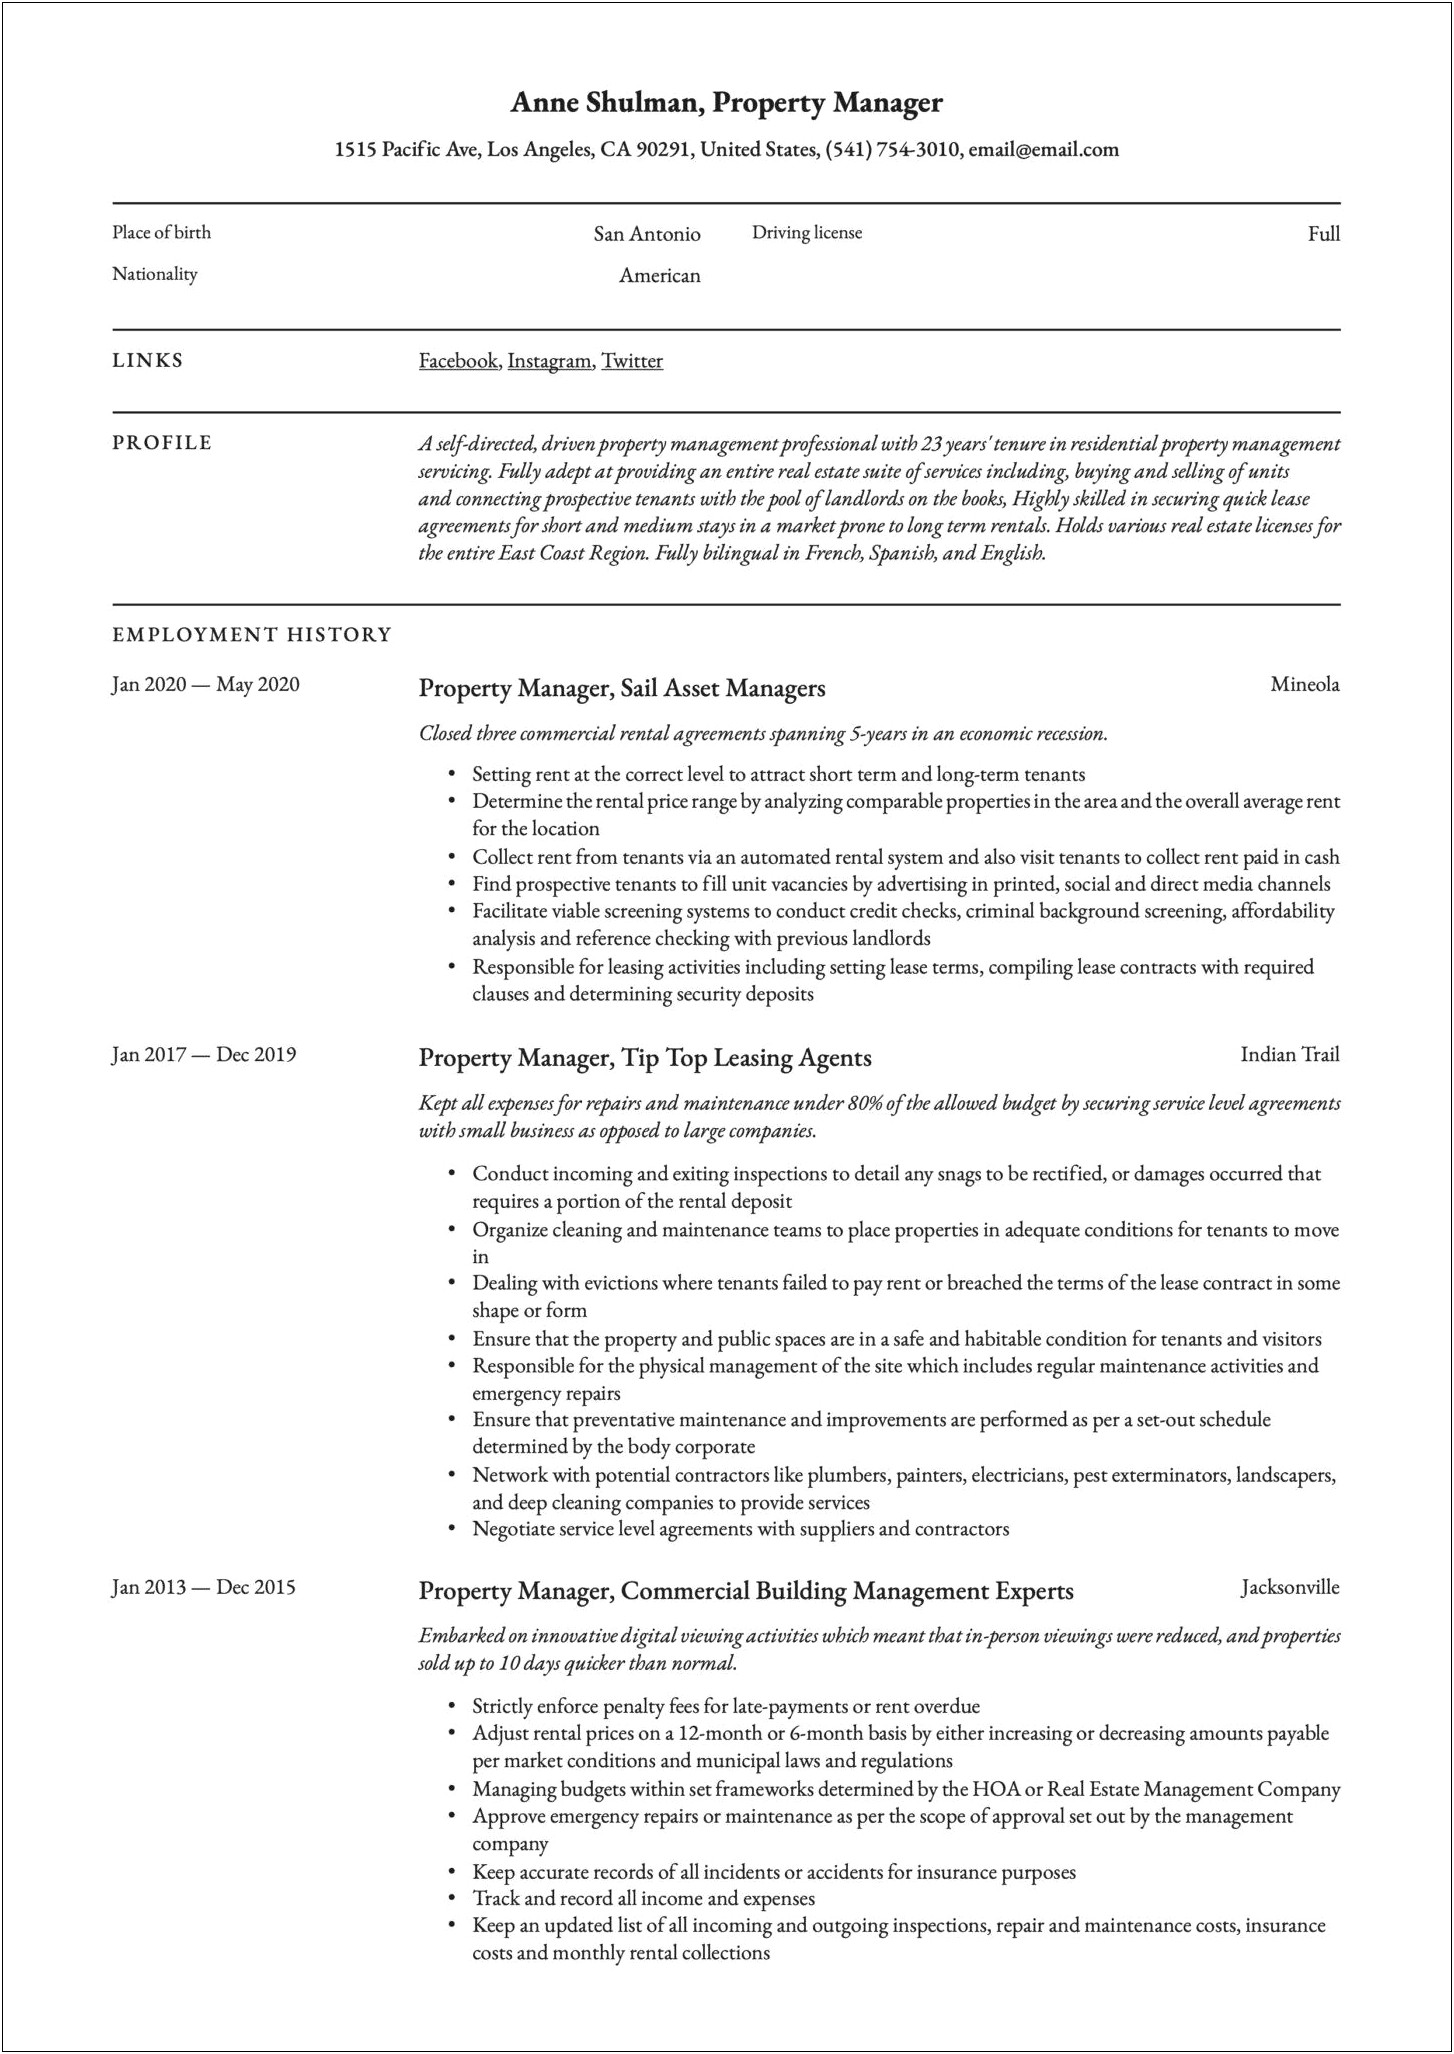 Regional Property Manager Resume Objective